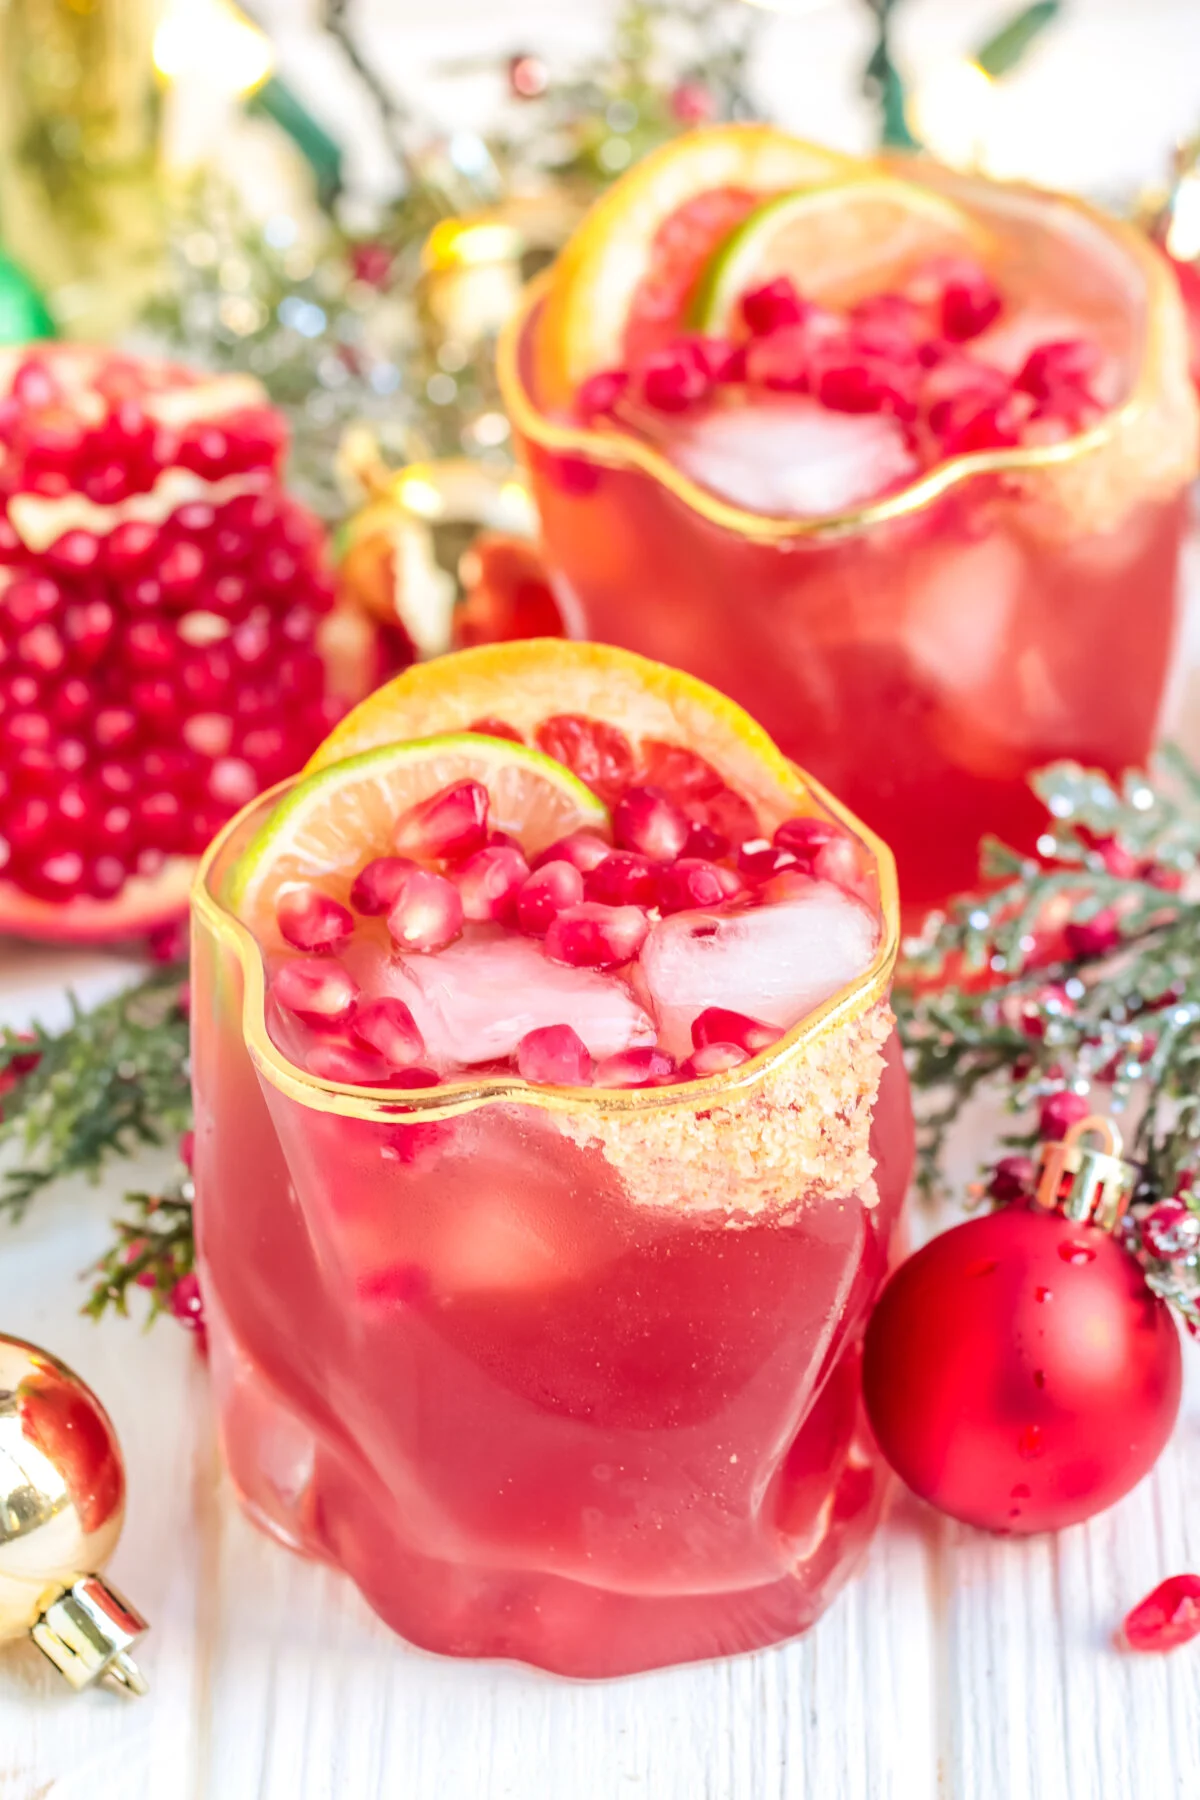 This festive pomegranate ginger paloma recipe is perfect for Christmas parties or gatherings! It's an easy to make ,holiday cocktail.